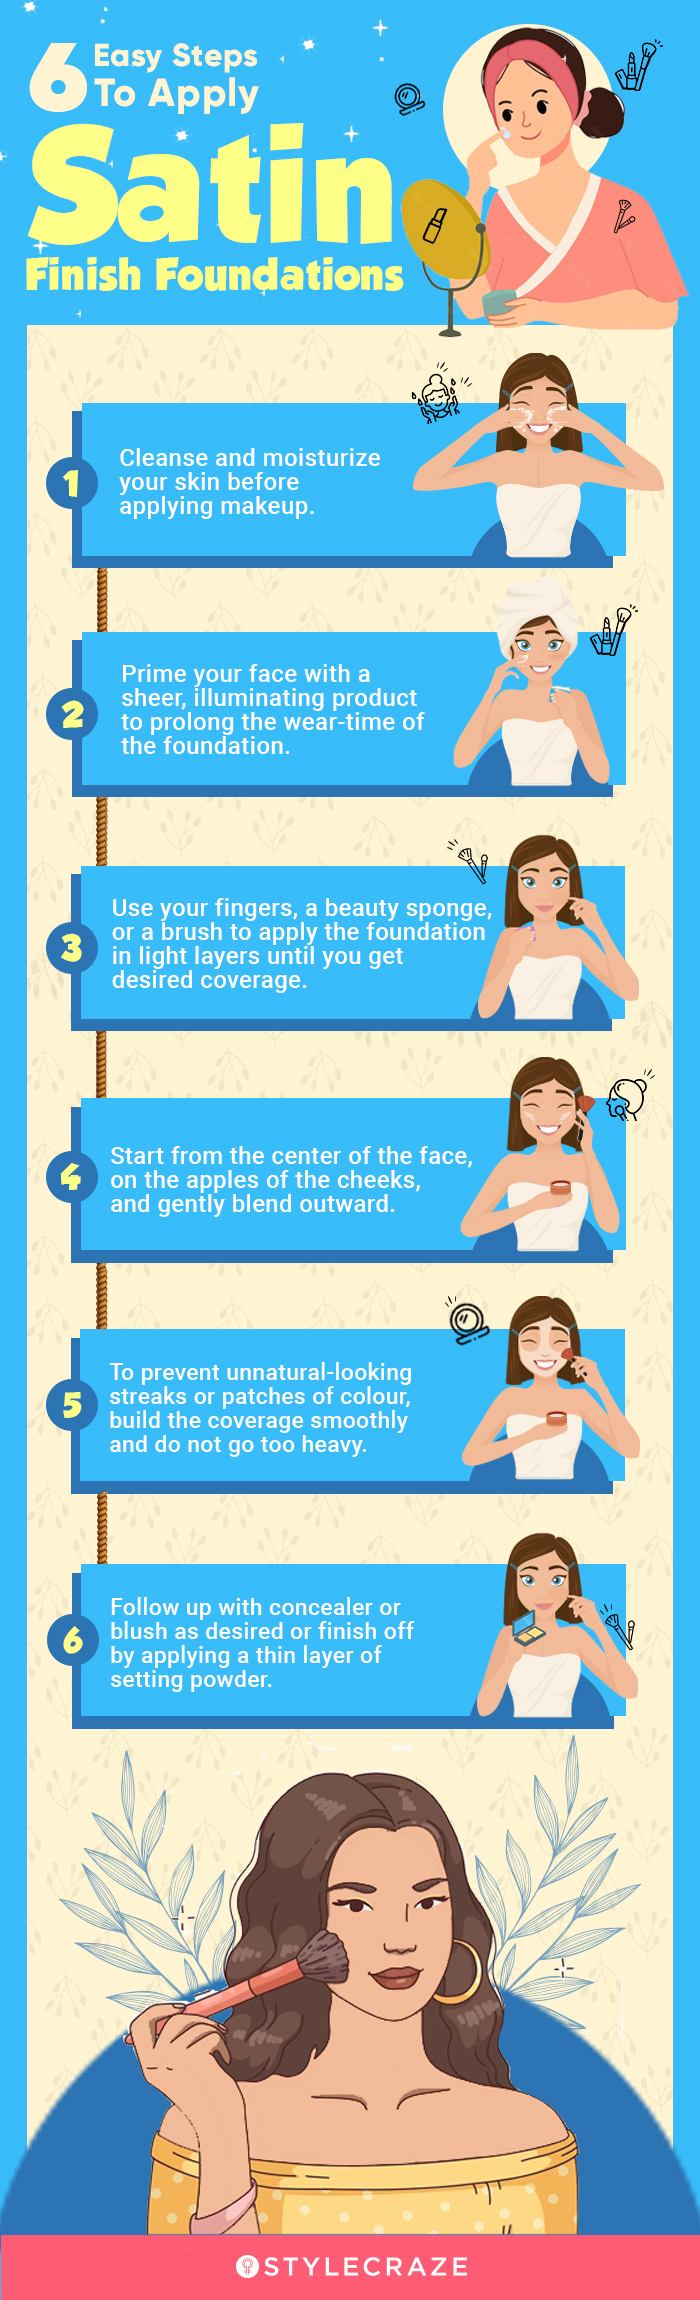 5 Easy Steps To Apply Satin Finish Foundation (infographic)